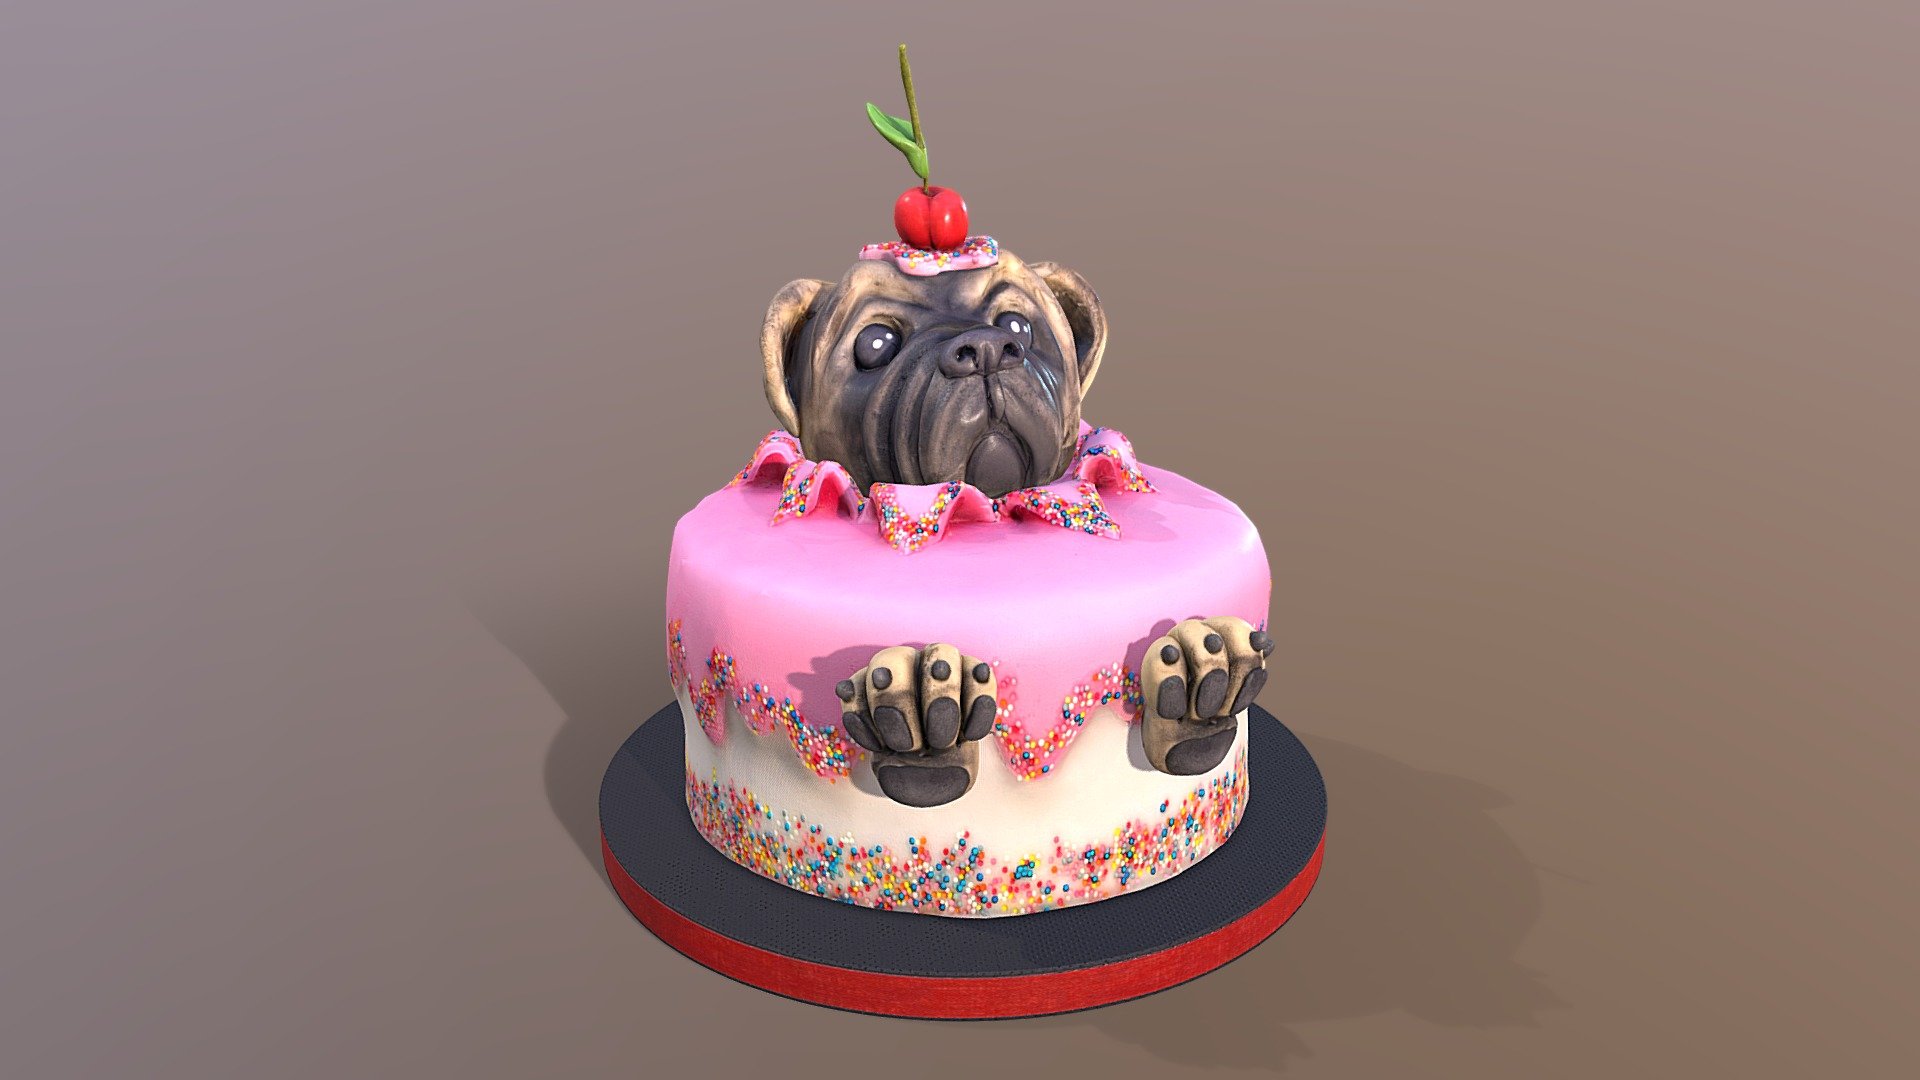 This georgeous Pug pop-up Cake model was created using photogrammetry which is made by CAKESBURG Premium Cake Shop in the UK. You can purchase real cake from this link: https://cakesburg.co.uk/products/pug-cake?_pos=1&amp;_sid=d7263bdb7&amp;_ss=r

Textures 3X 4096*4096px PBR photoscan-based materials Base Color, Normal Map, Roughness) - Pug Cake - Buy Royalty Free 3D model by Cakesburg Premium 3D Cake Shop (@Viscom_Cakesburg) 3d model